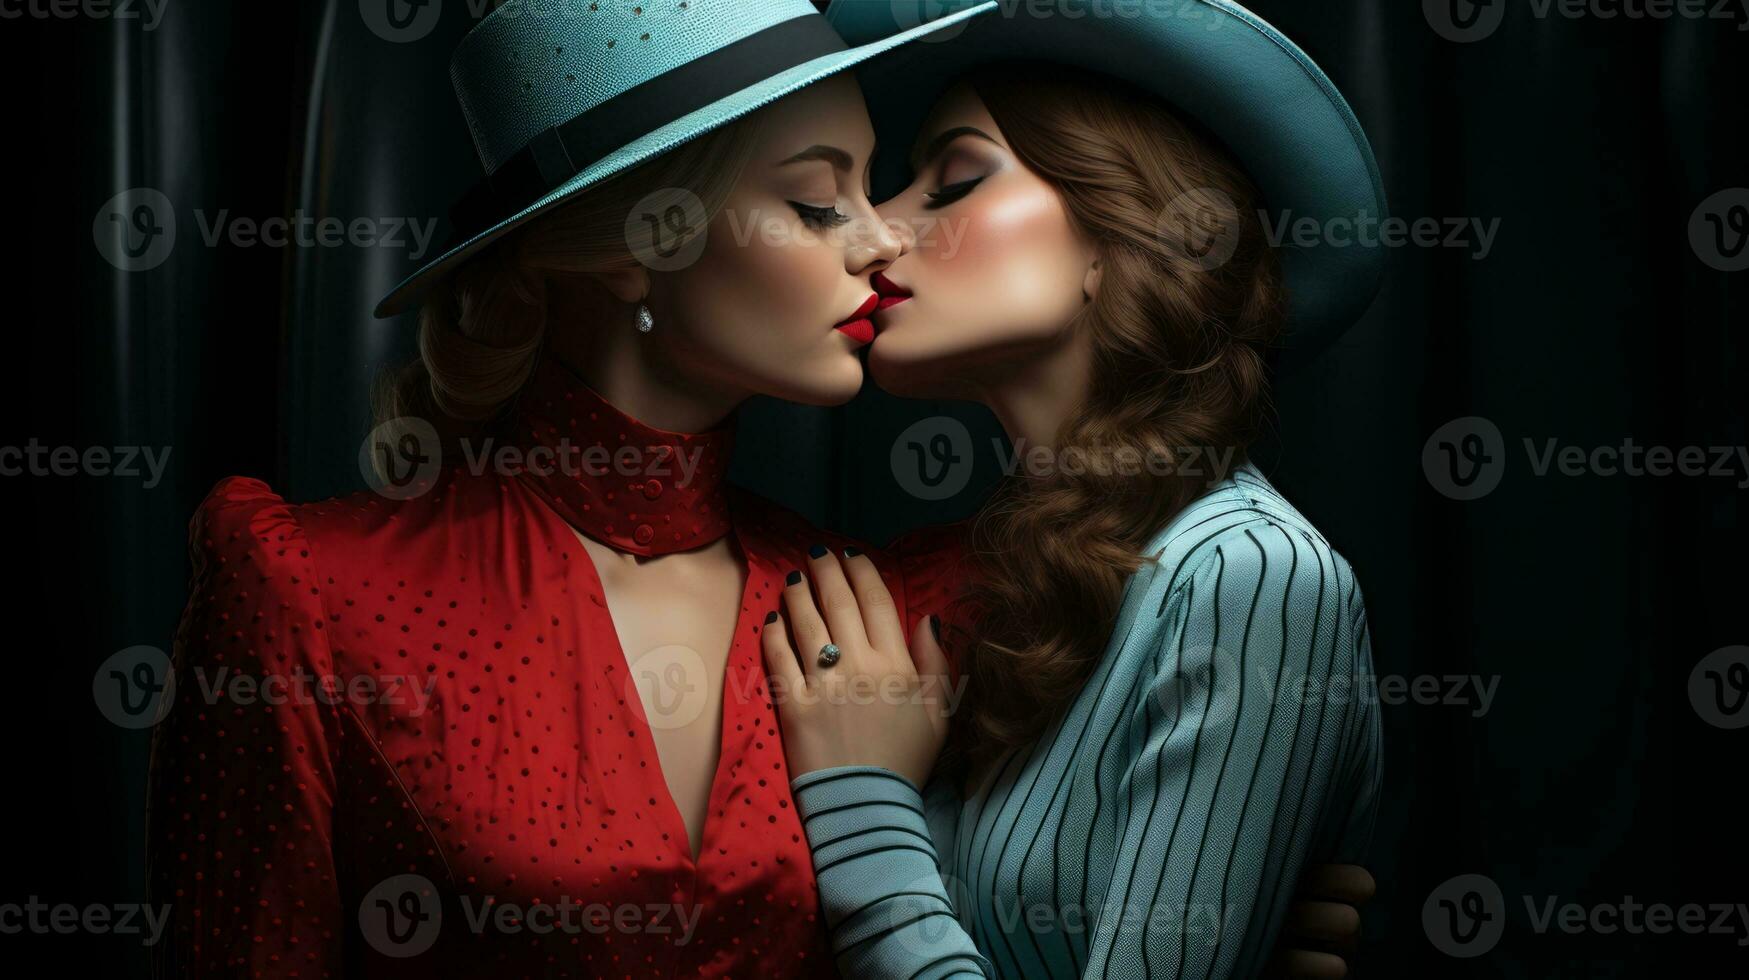 In an indoor portrait, two women clad in fashion-forward clothing and headgear passionately embrace, their red lips meeting in a wild display of love and style, AI Generative photo